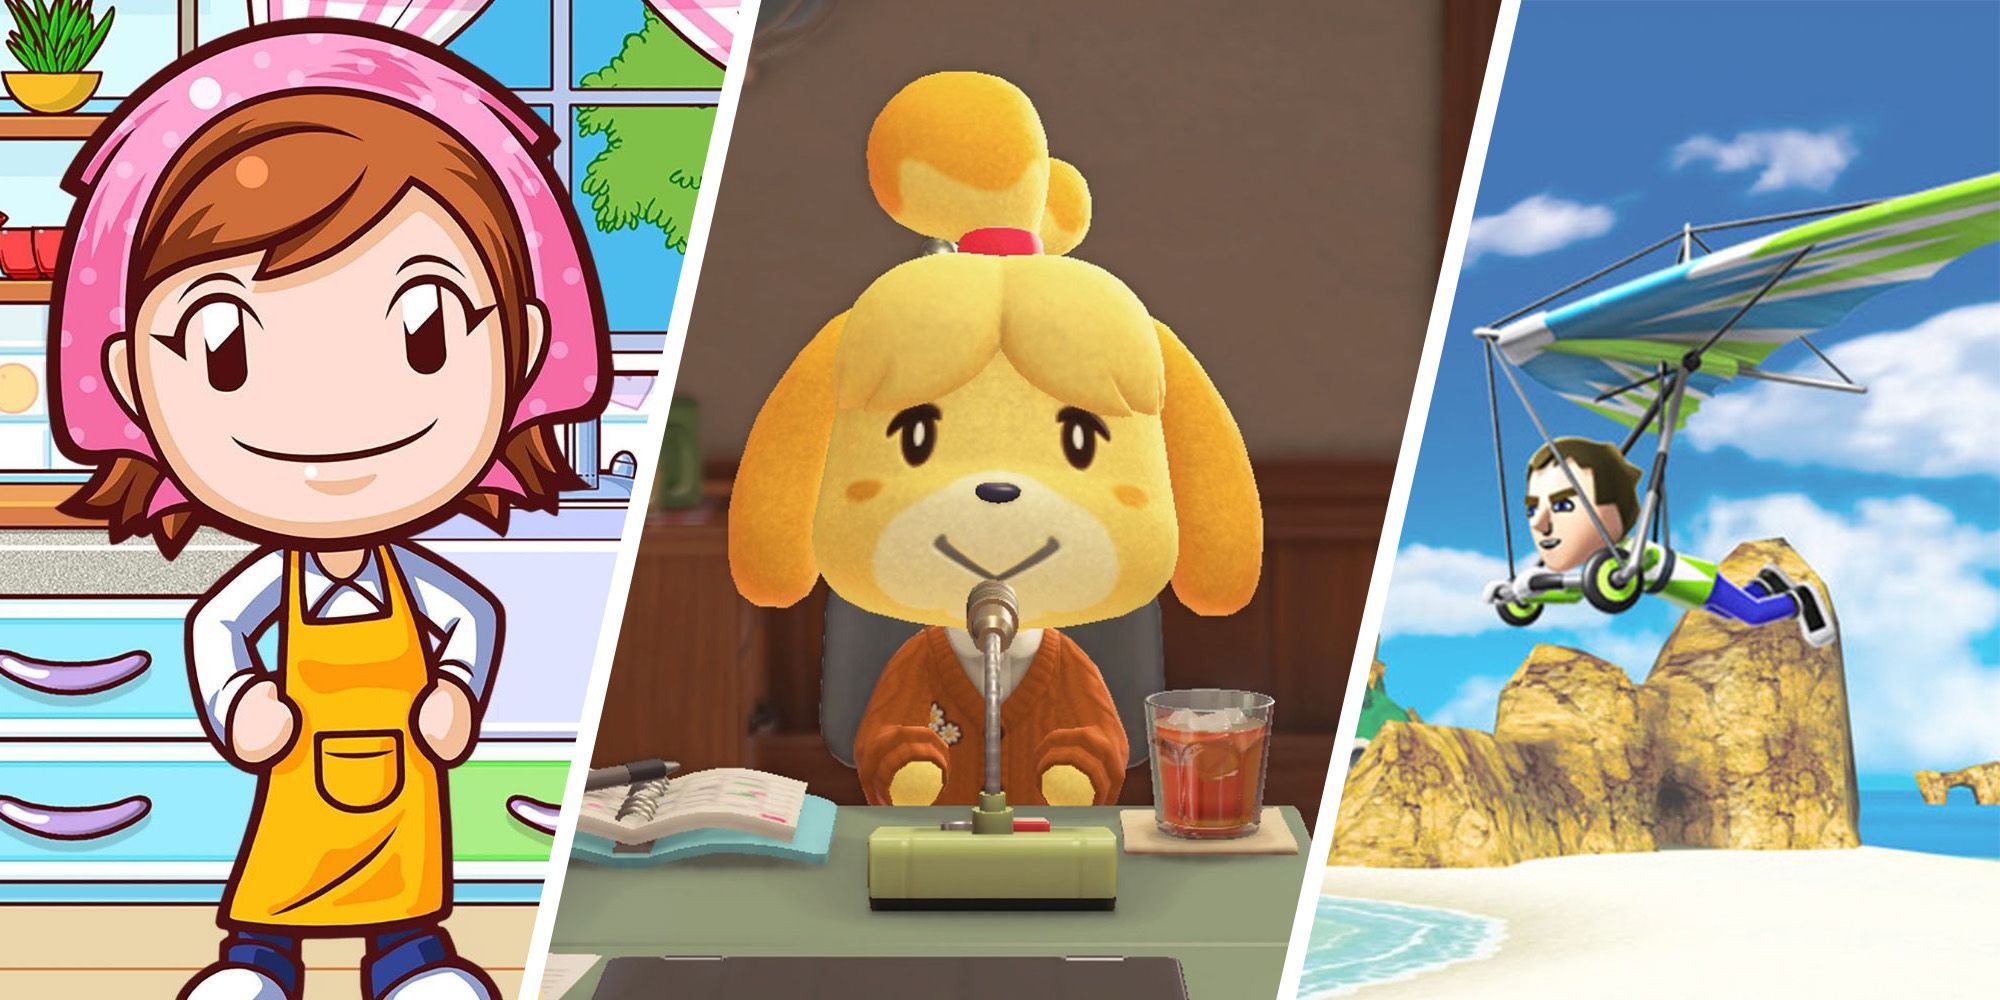 Best Simulation Games On Nintendo 3DS - Cooking Mama, Isabelle Animal Crossing New Leaf, Pilotwings Resort